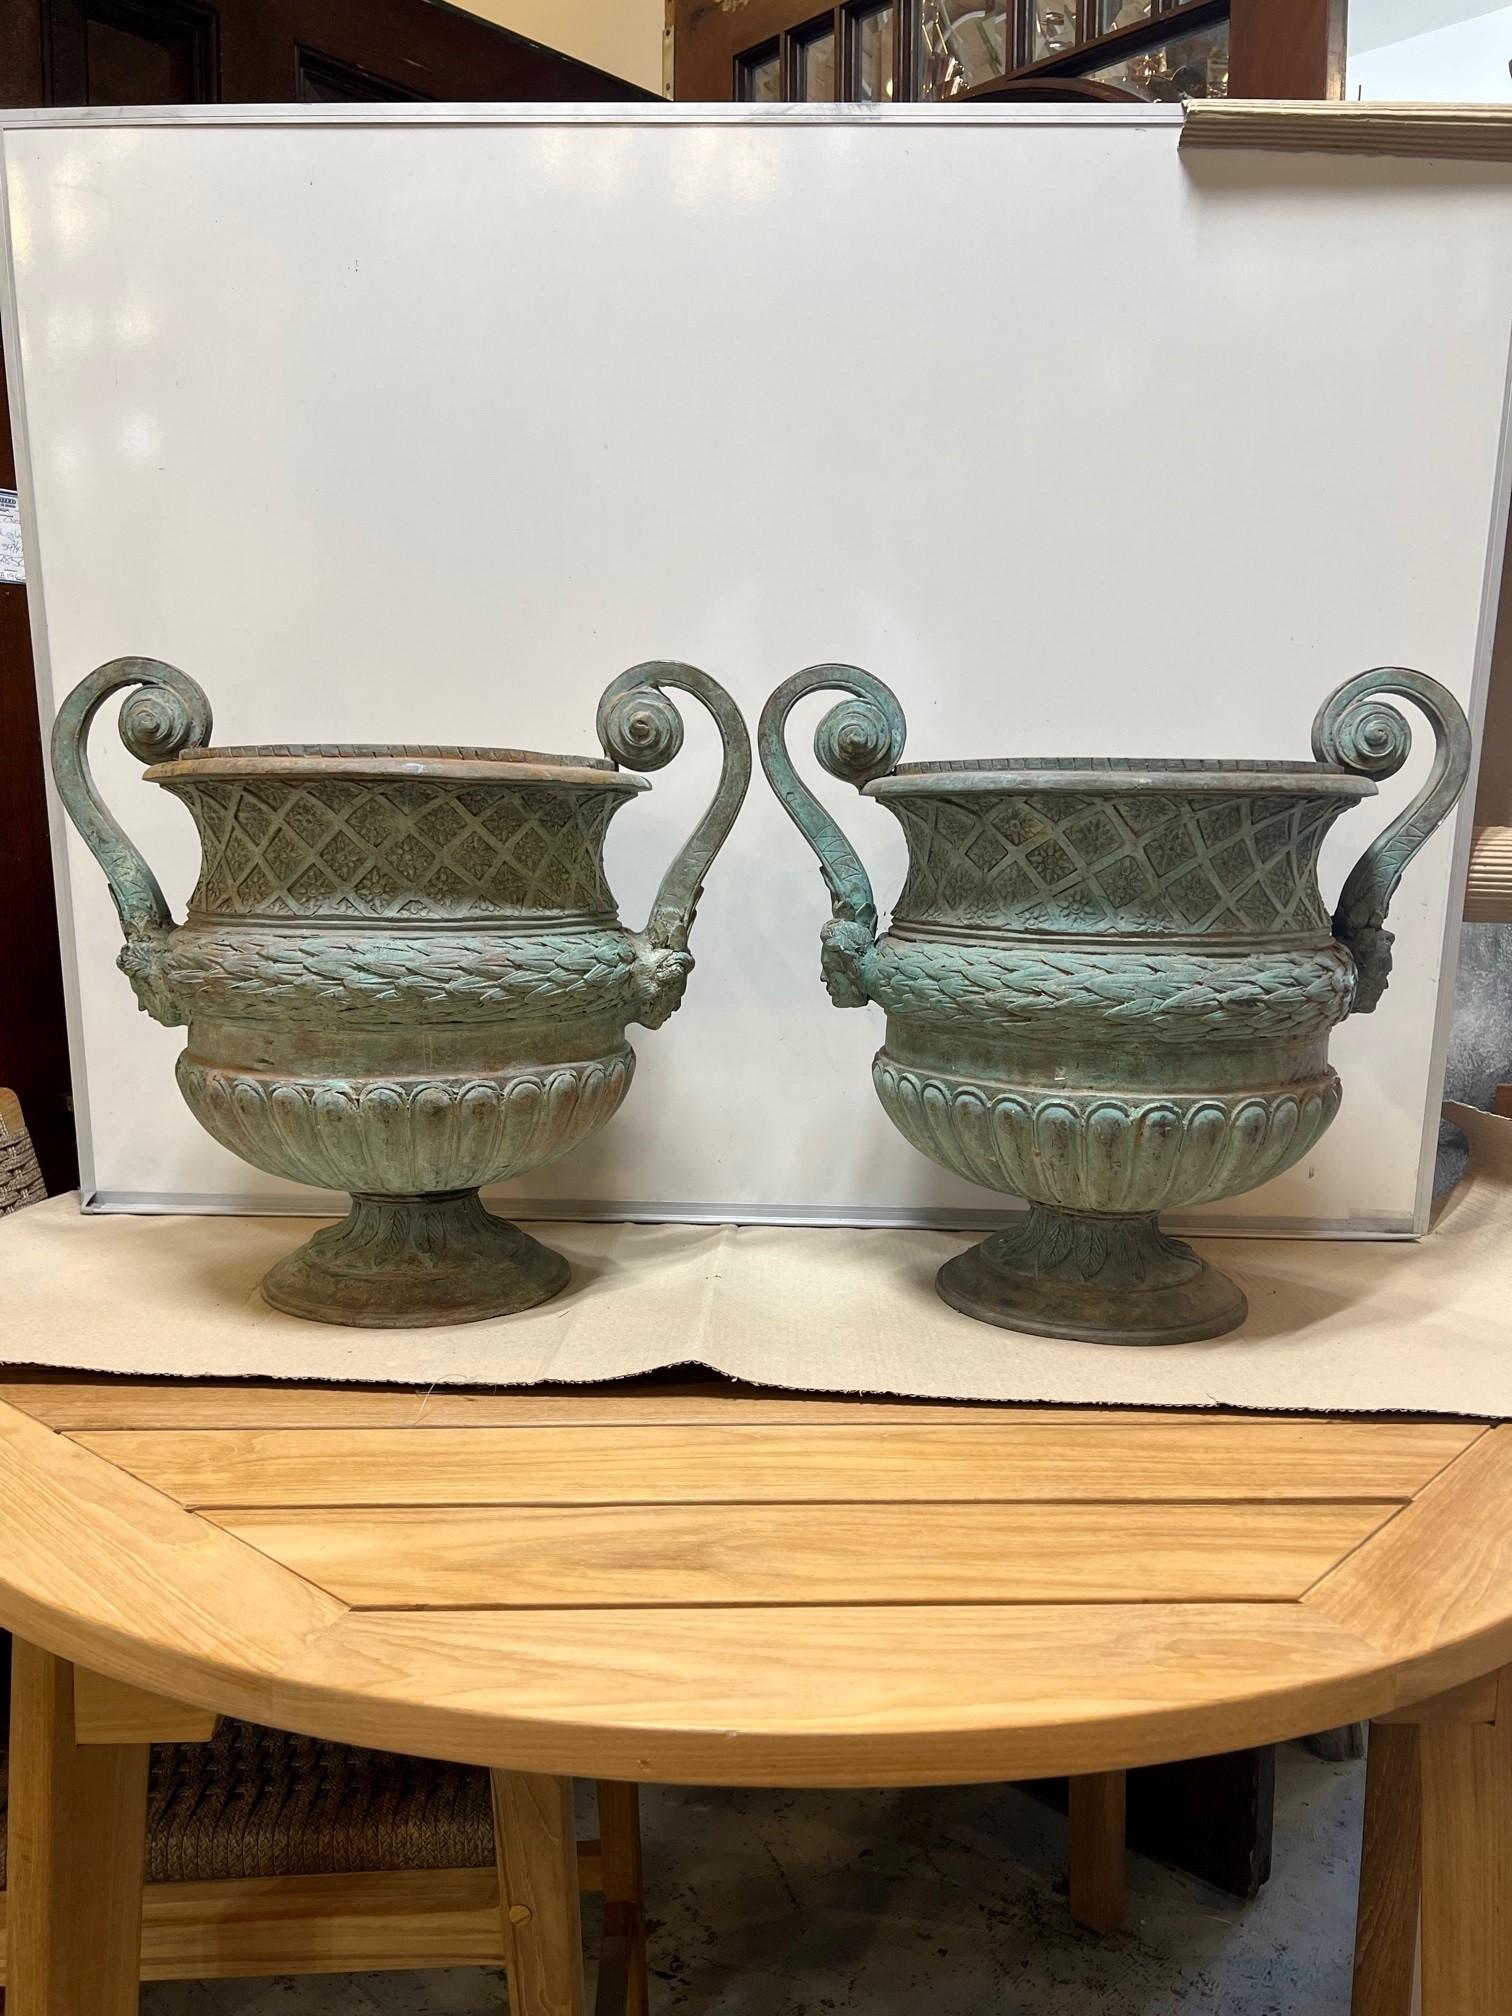 A very nice pair of bronze urns with large handles, intricate detailing and a beautiful Verde patina. Created with the tradition technique of the lost-wax that allows a great precision in the details. This is a great pair of urns good size and price